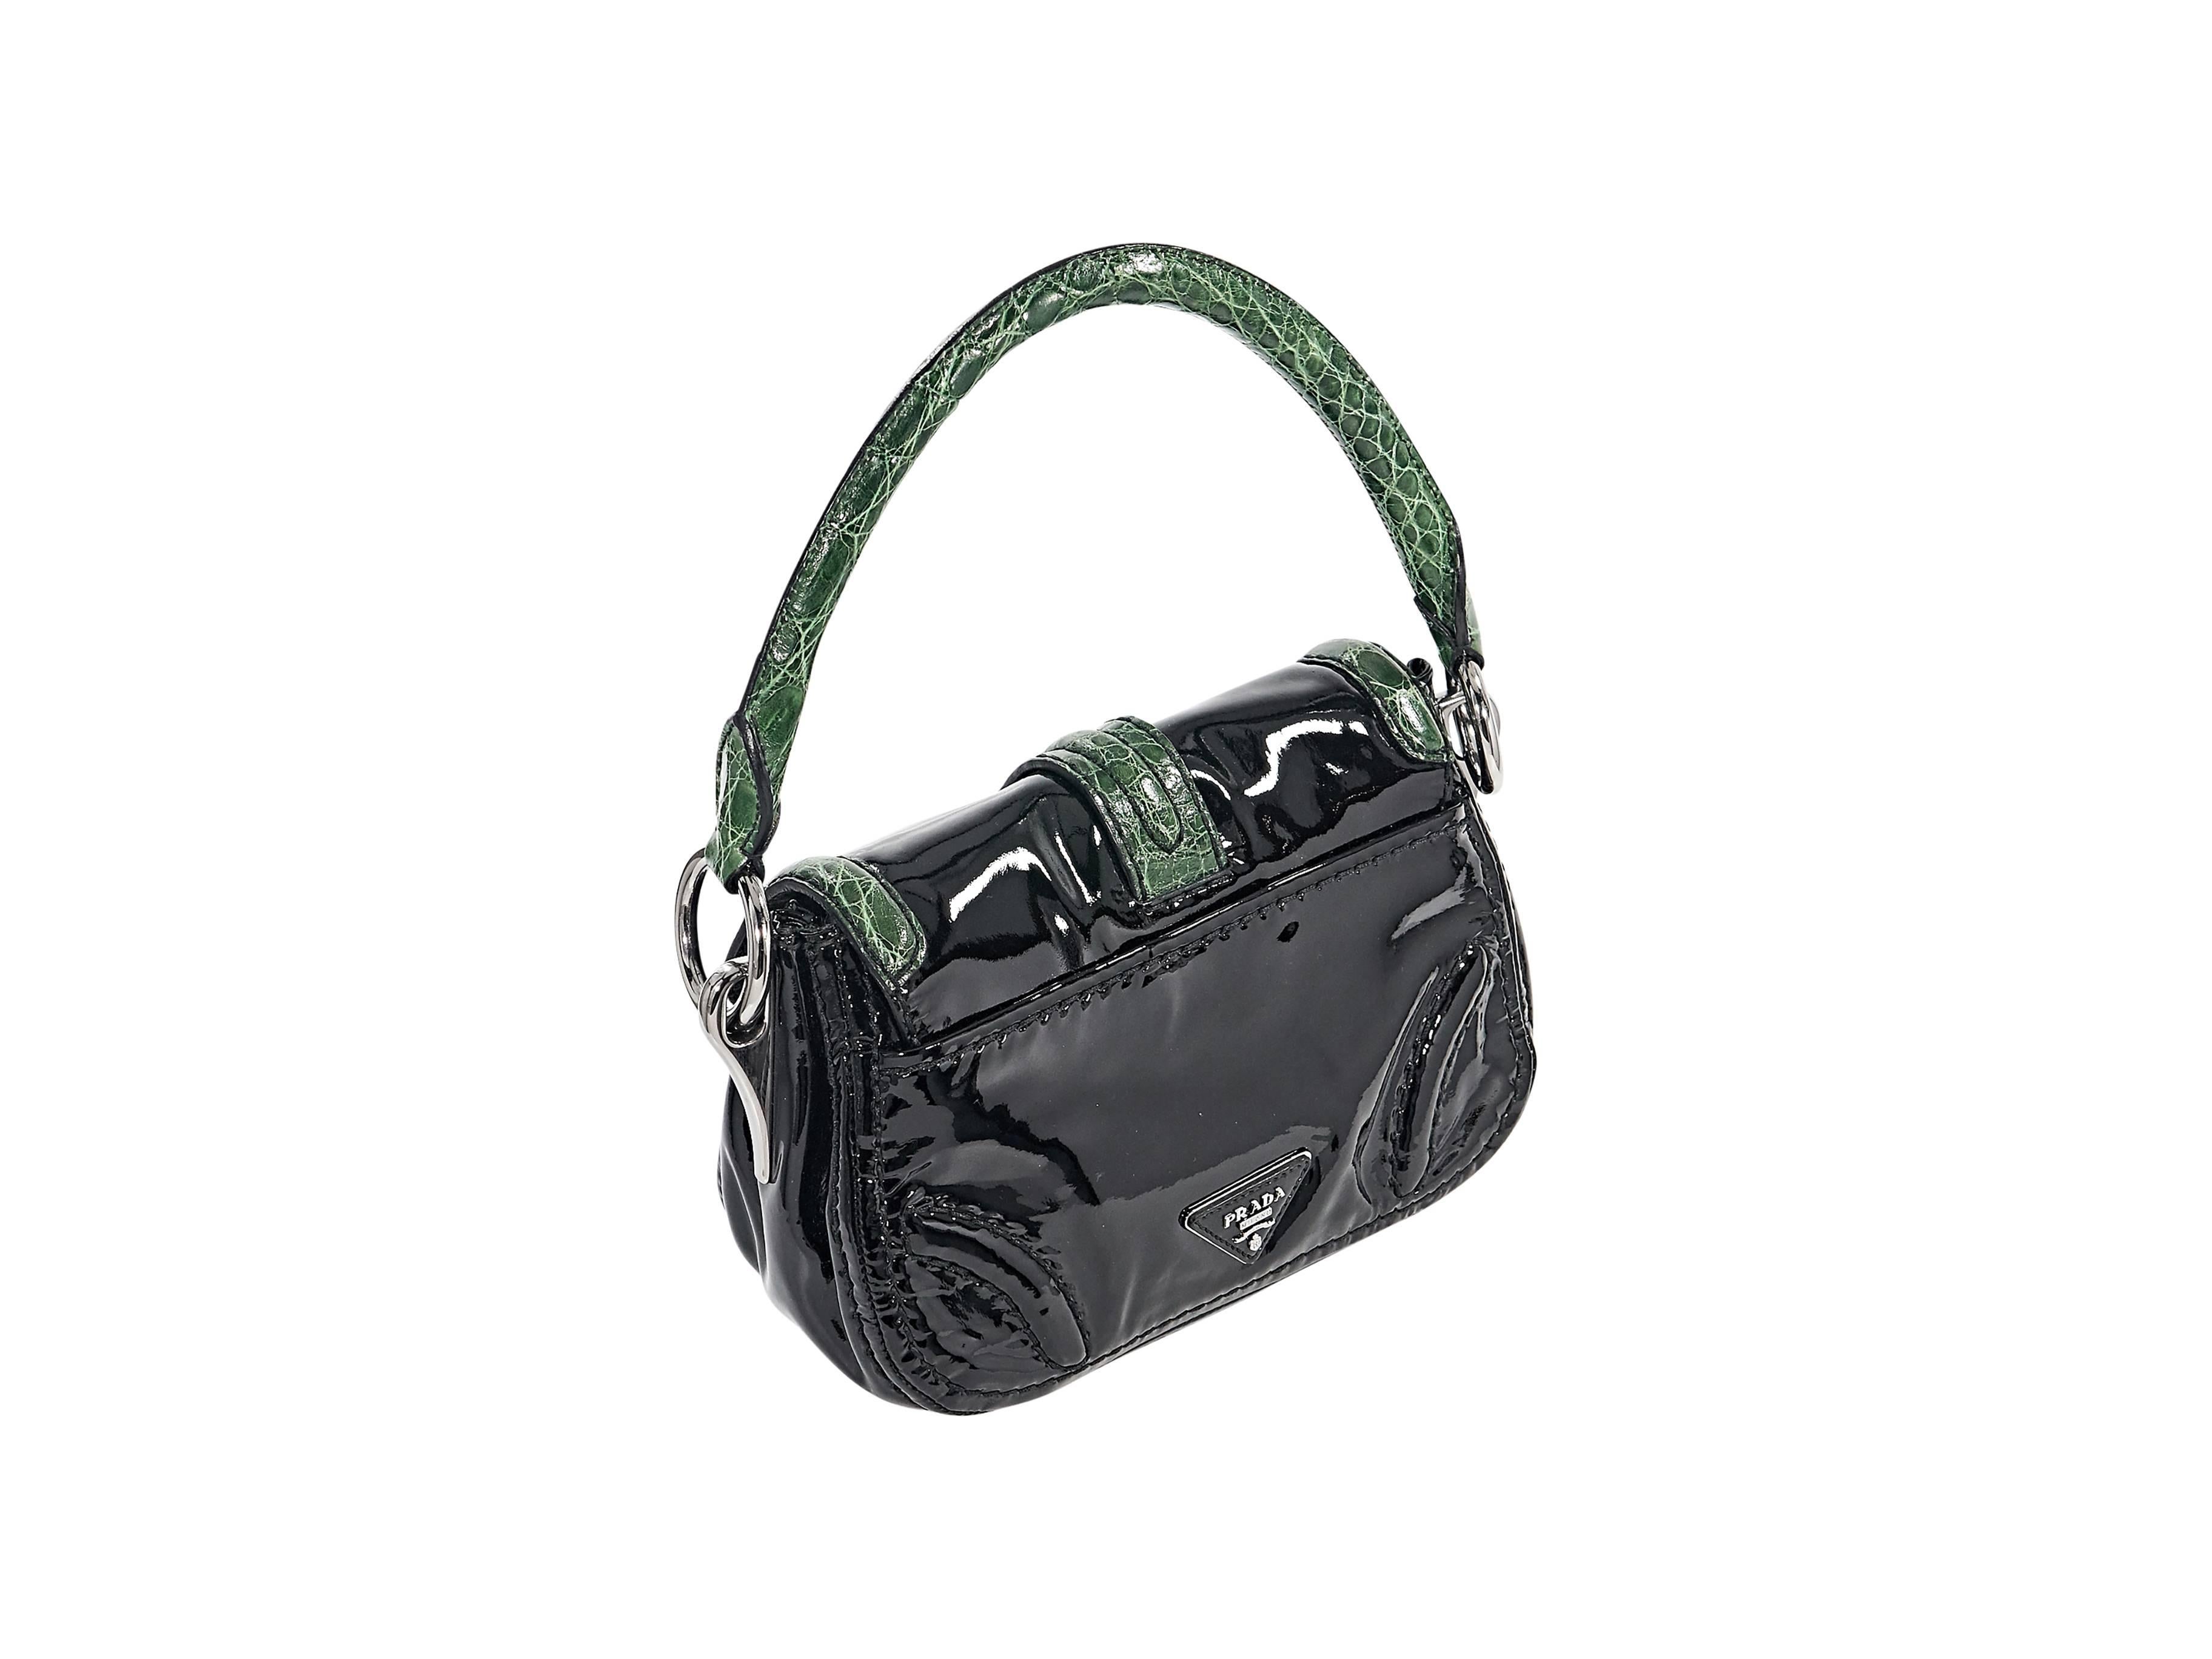 Product details:  Black patent leather hobo handbag by Prada.  Trimmed with green crocodile skin. Single shoulder strap.  Front flap with twist-lock closure.  Lined interior with inner zip and slide pockets.  Protective metal feet.  Silvertone